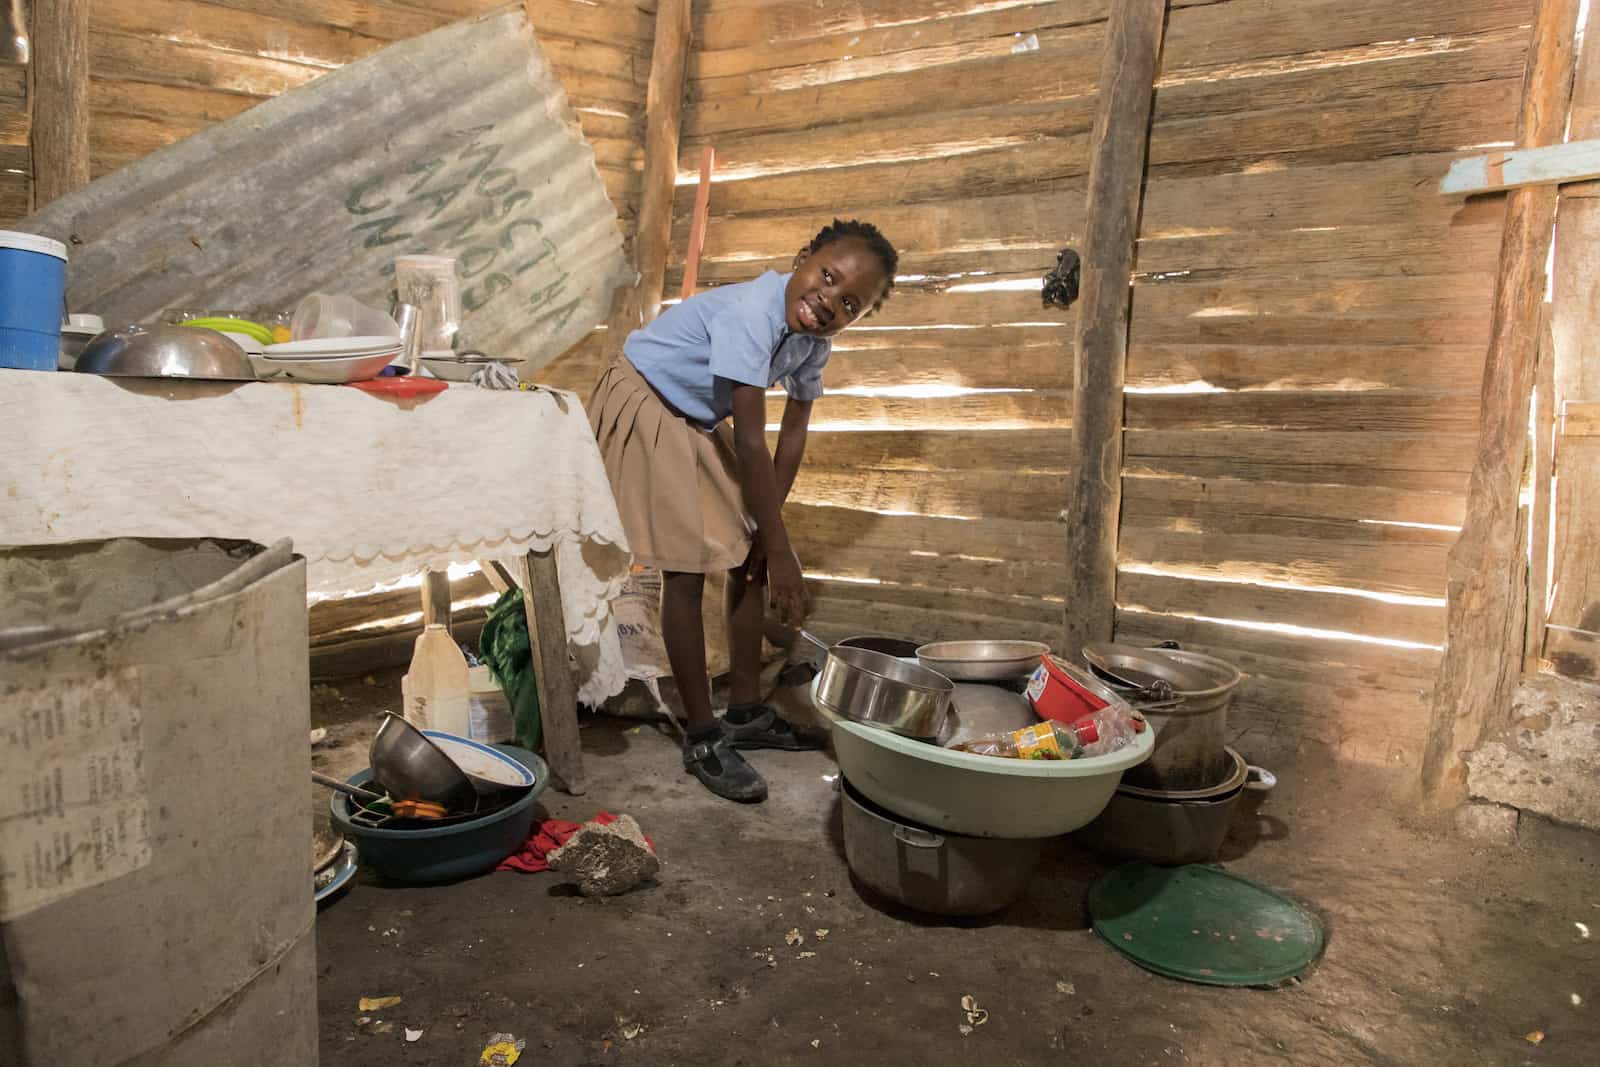 A girl in a blue shirt and tan skirt leans over pots and pans on a dirt floor. There is a table to one side. The walls are made of wood slats with holes in them. 